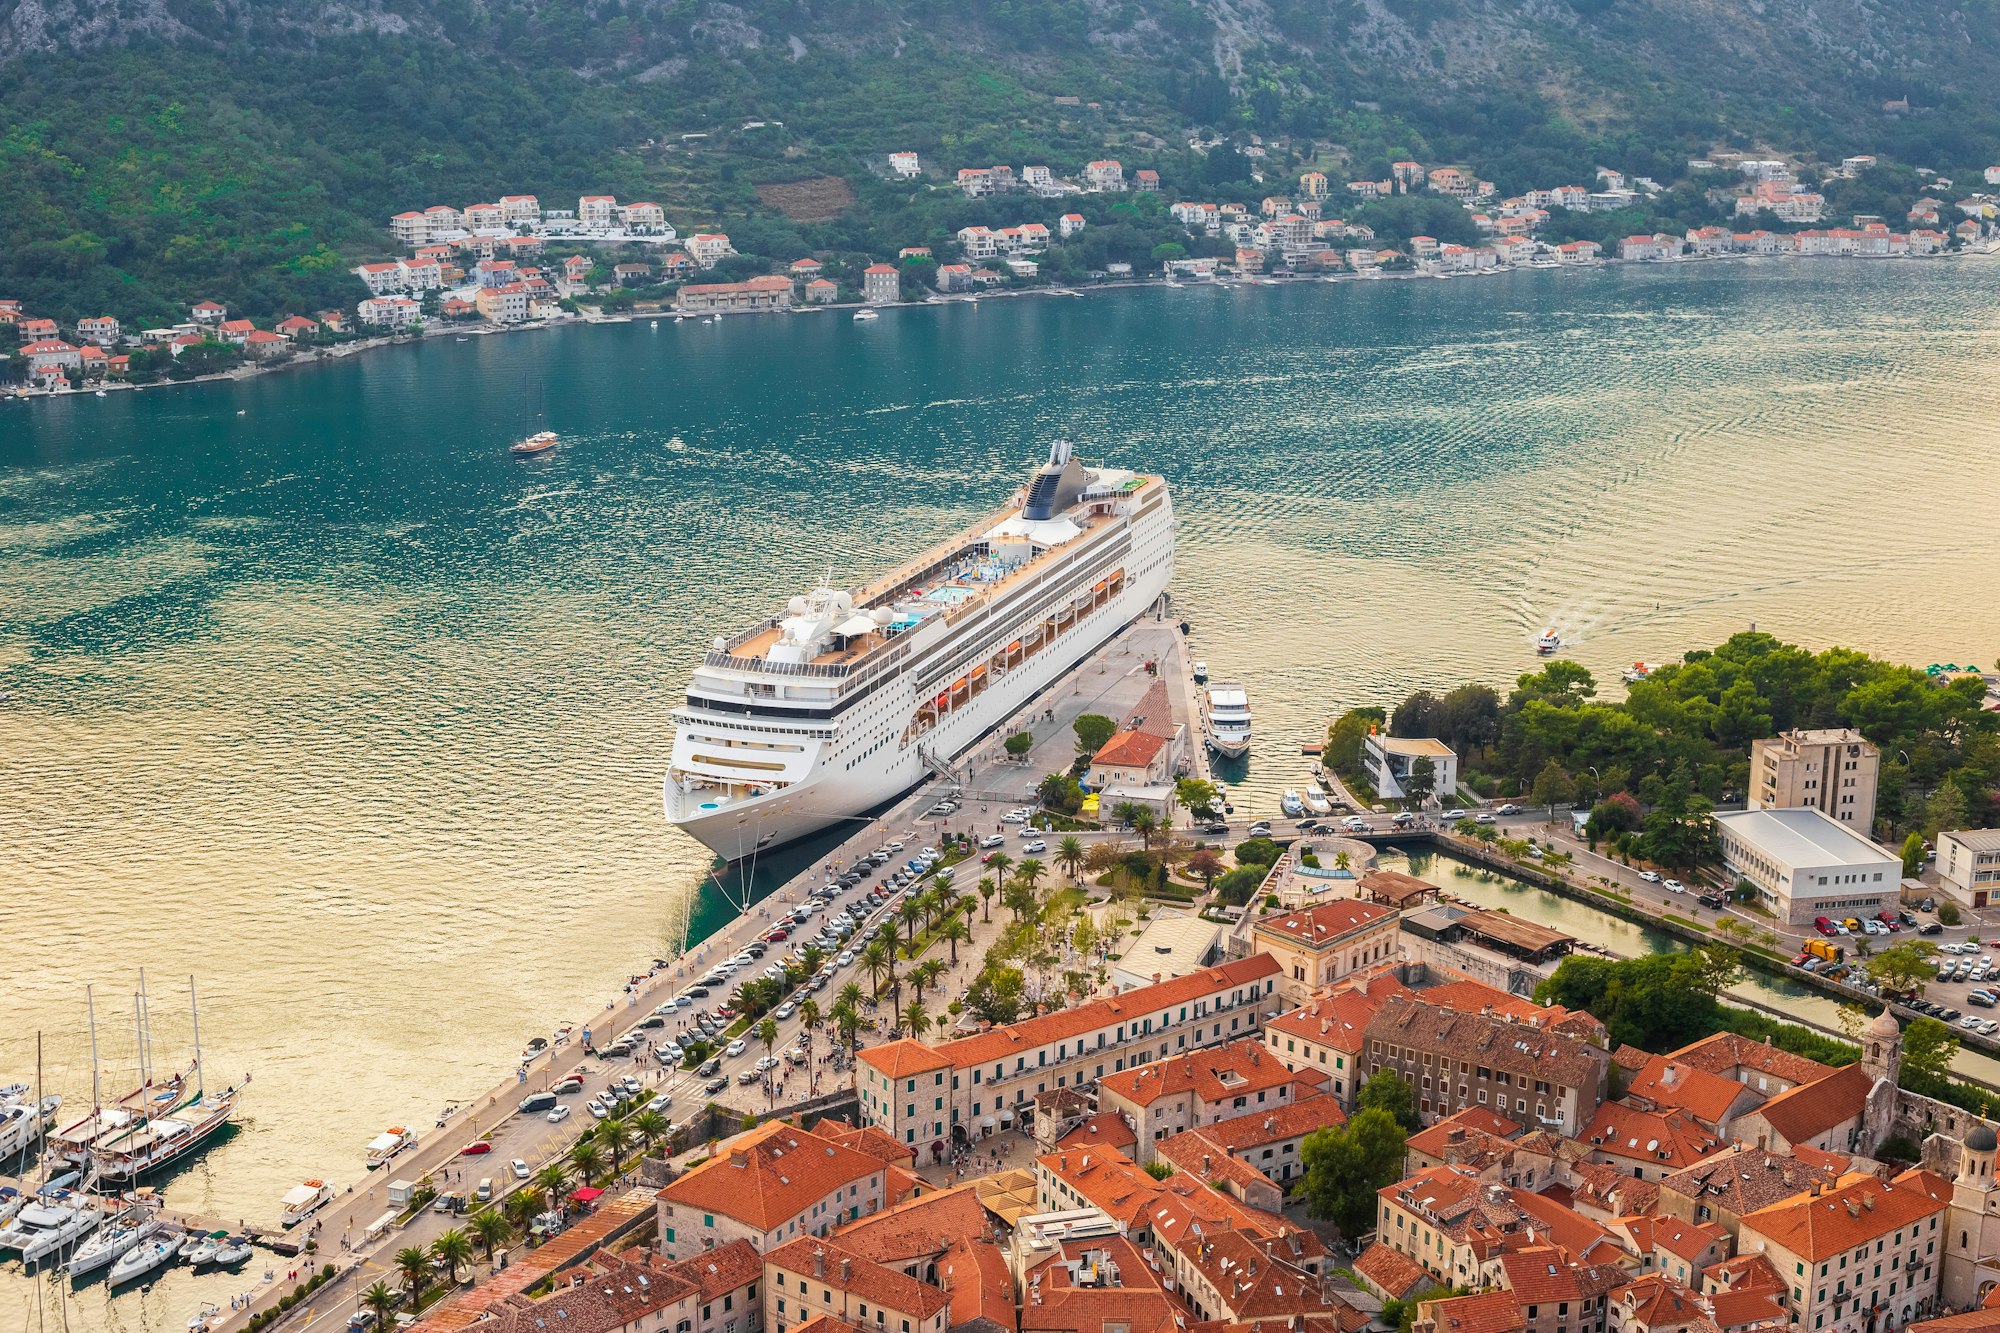 Large cruise ship arrived in the city of Kotor in Montenegro